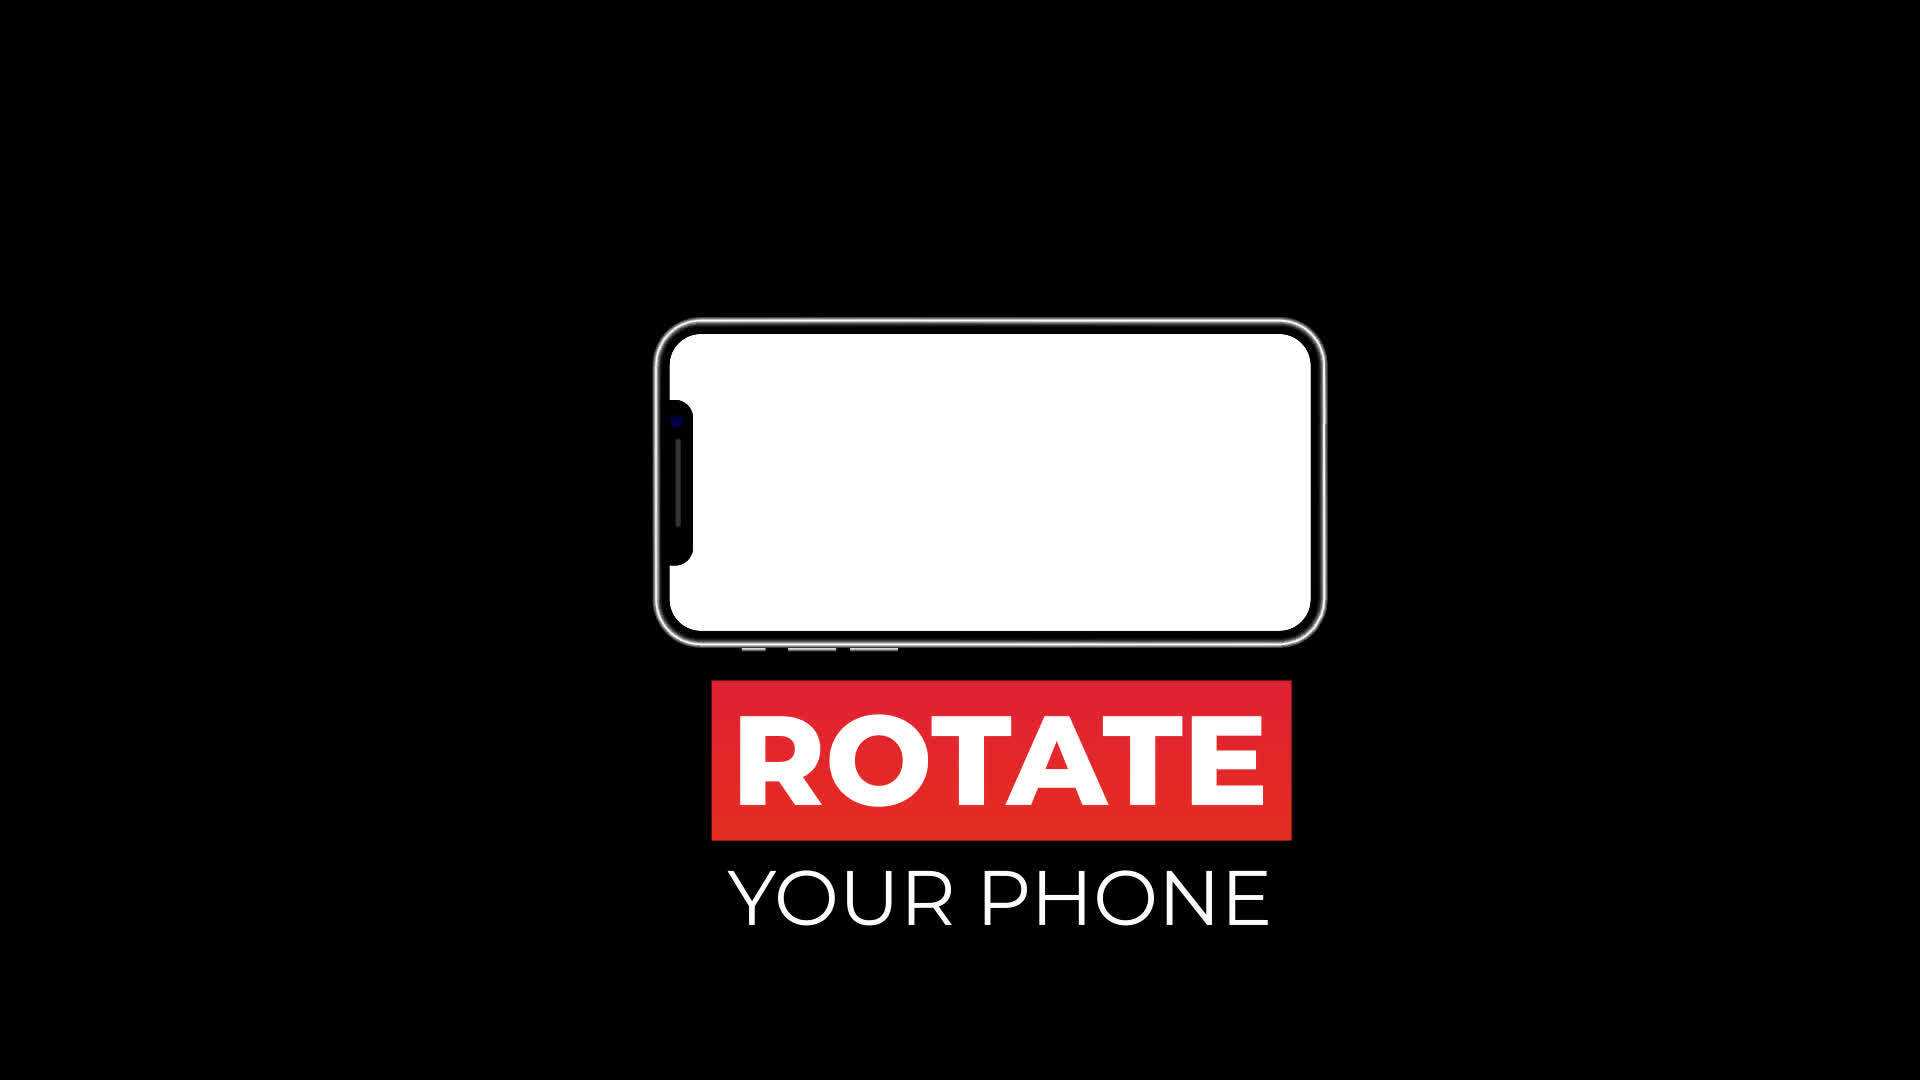 Rotate Your Phone Template Free Download